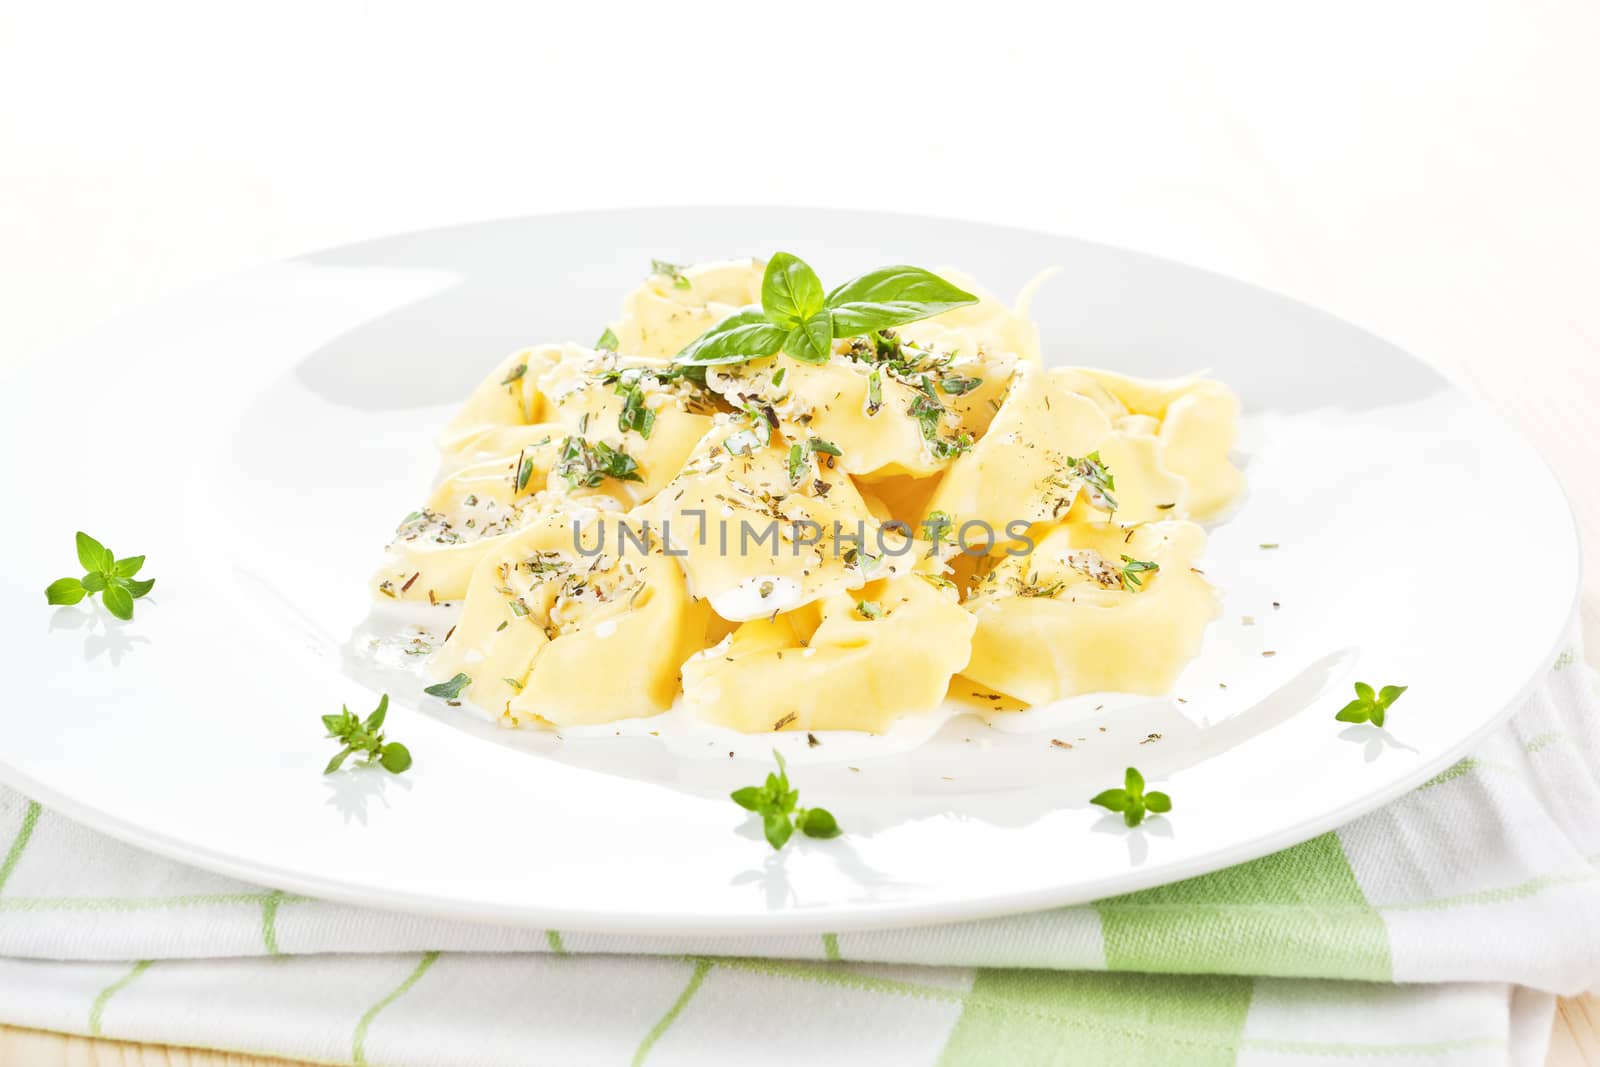 Tortellini with cheese sauce. by eskymaks